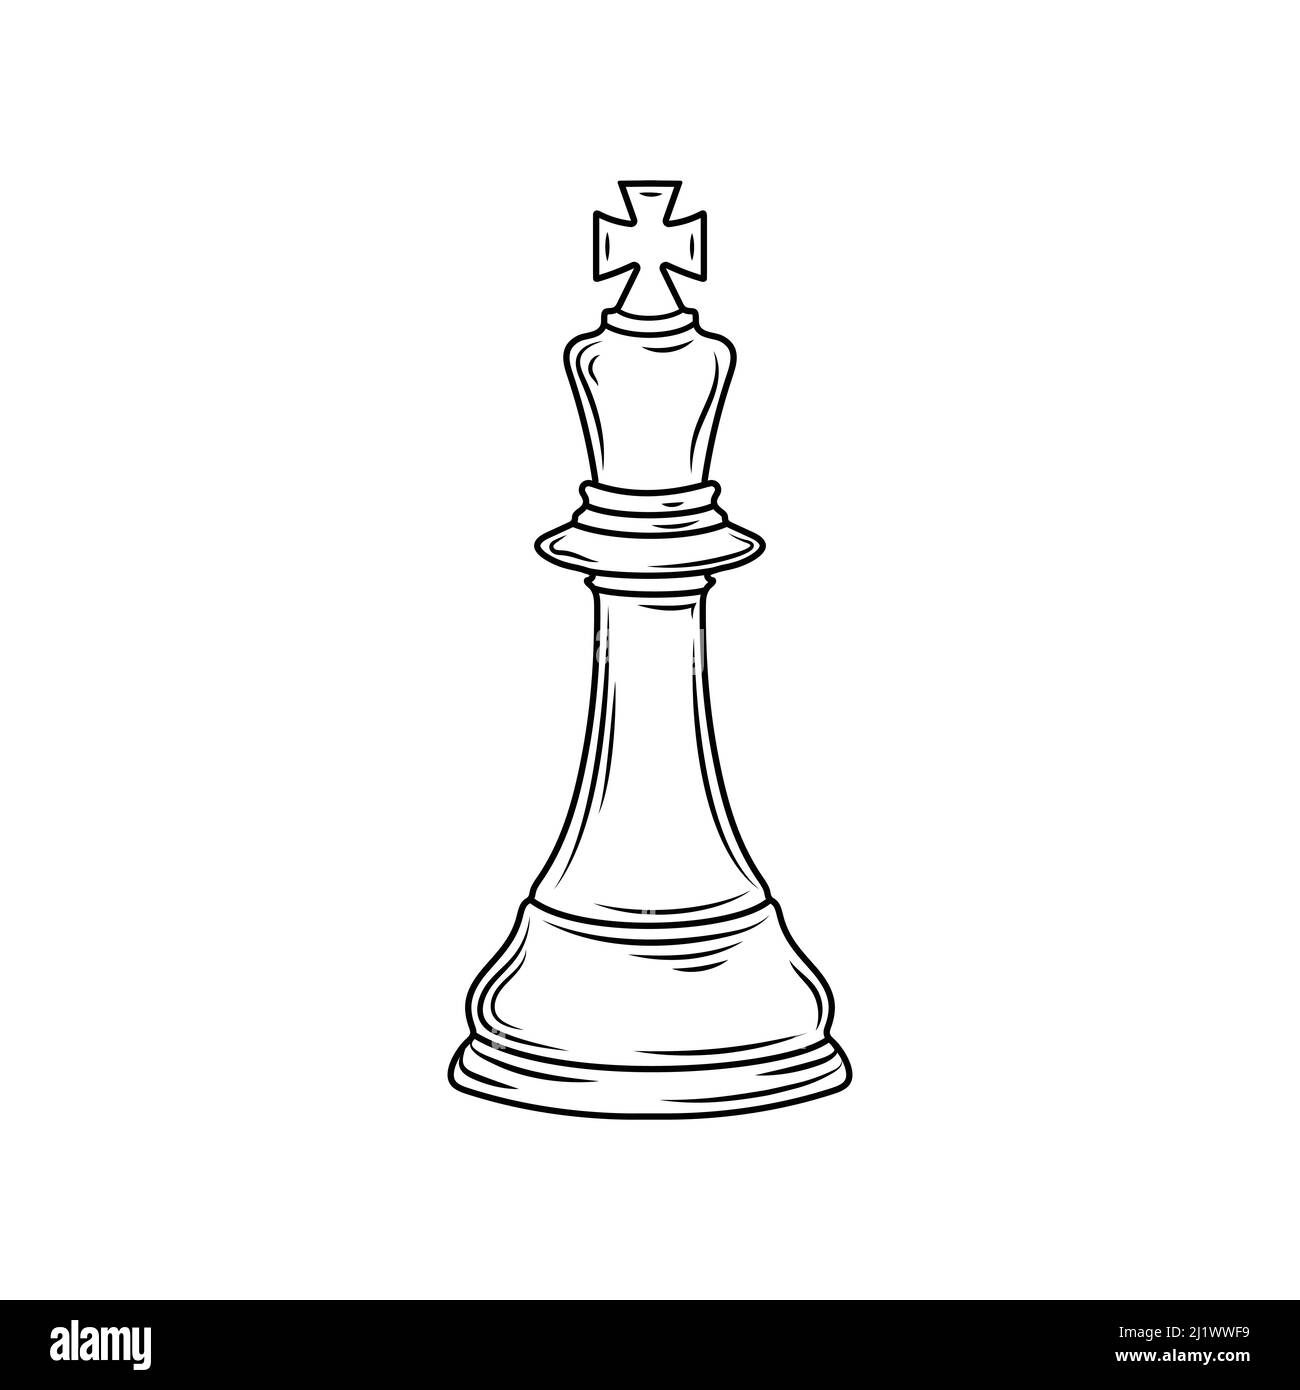 Hand Drawn Chess Pieces Collection Stock Illustration - Download